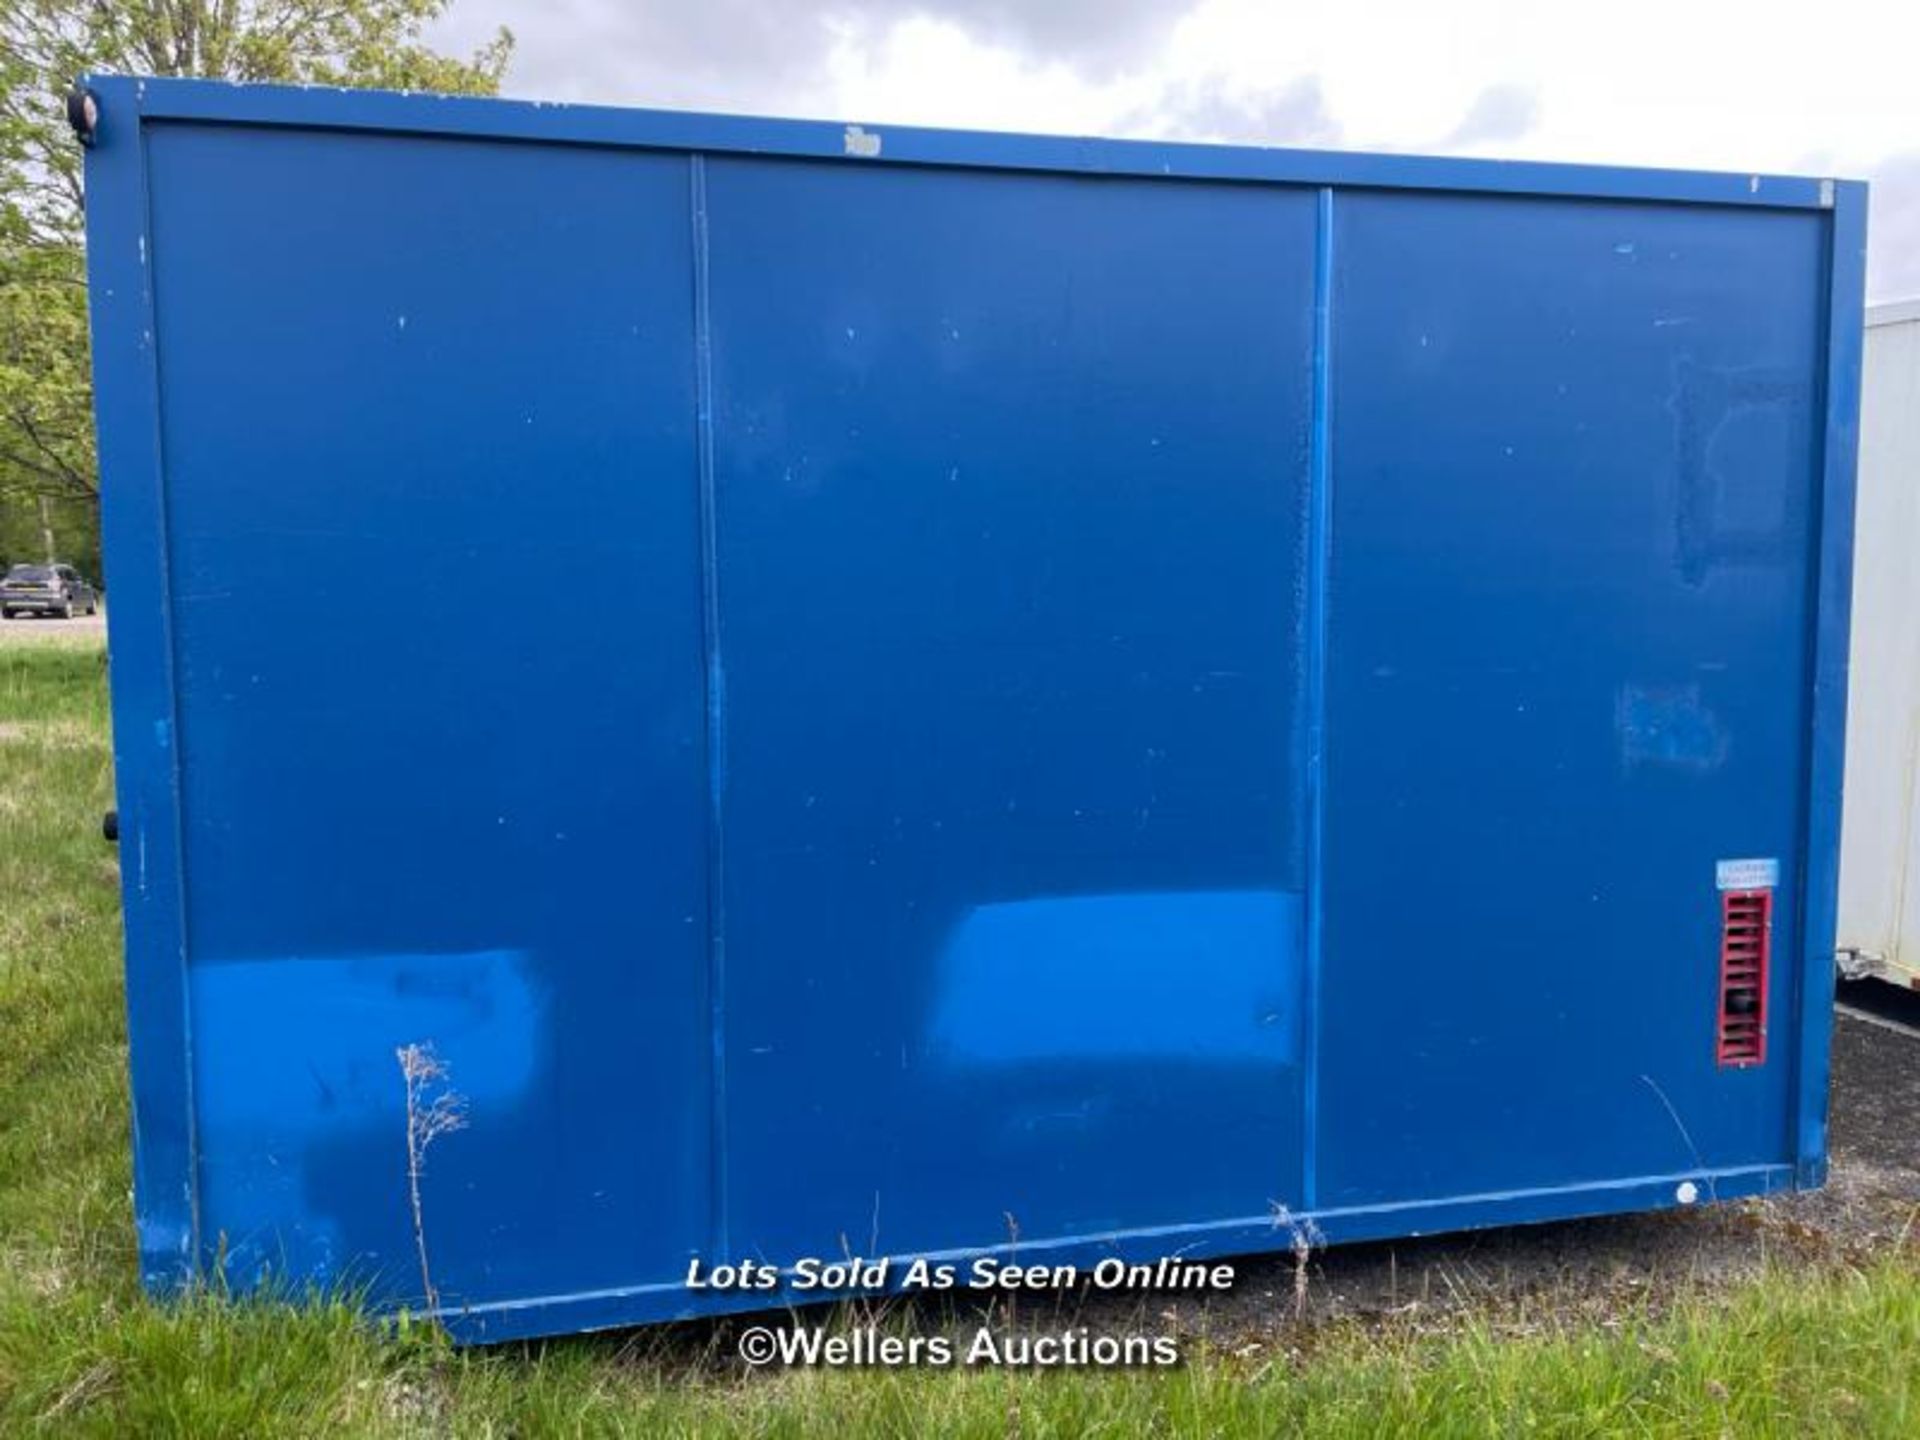 6 PERSON 12 X 7.5FT AJC EASY CABIN TOWABLE WELFARE UNIT, INCLUDES WASH BASIN, KETTLE, MICROWAVE, - Image 7 of 19